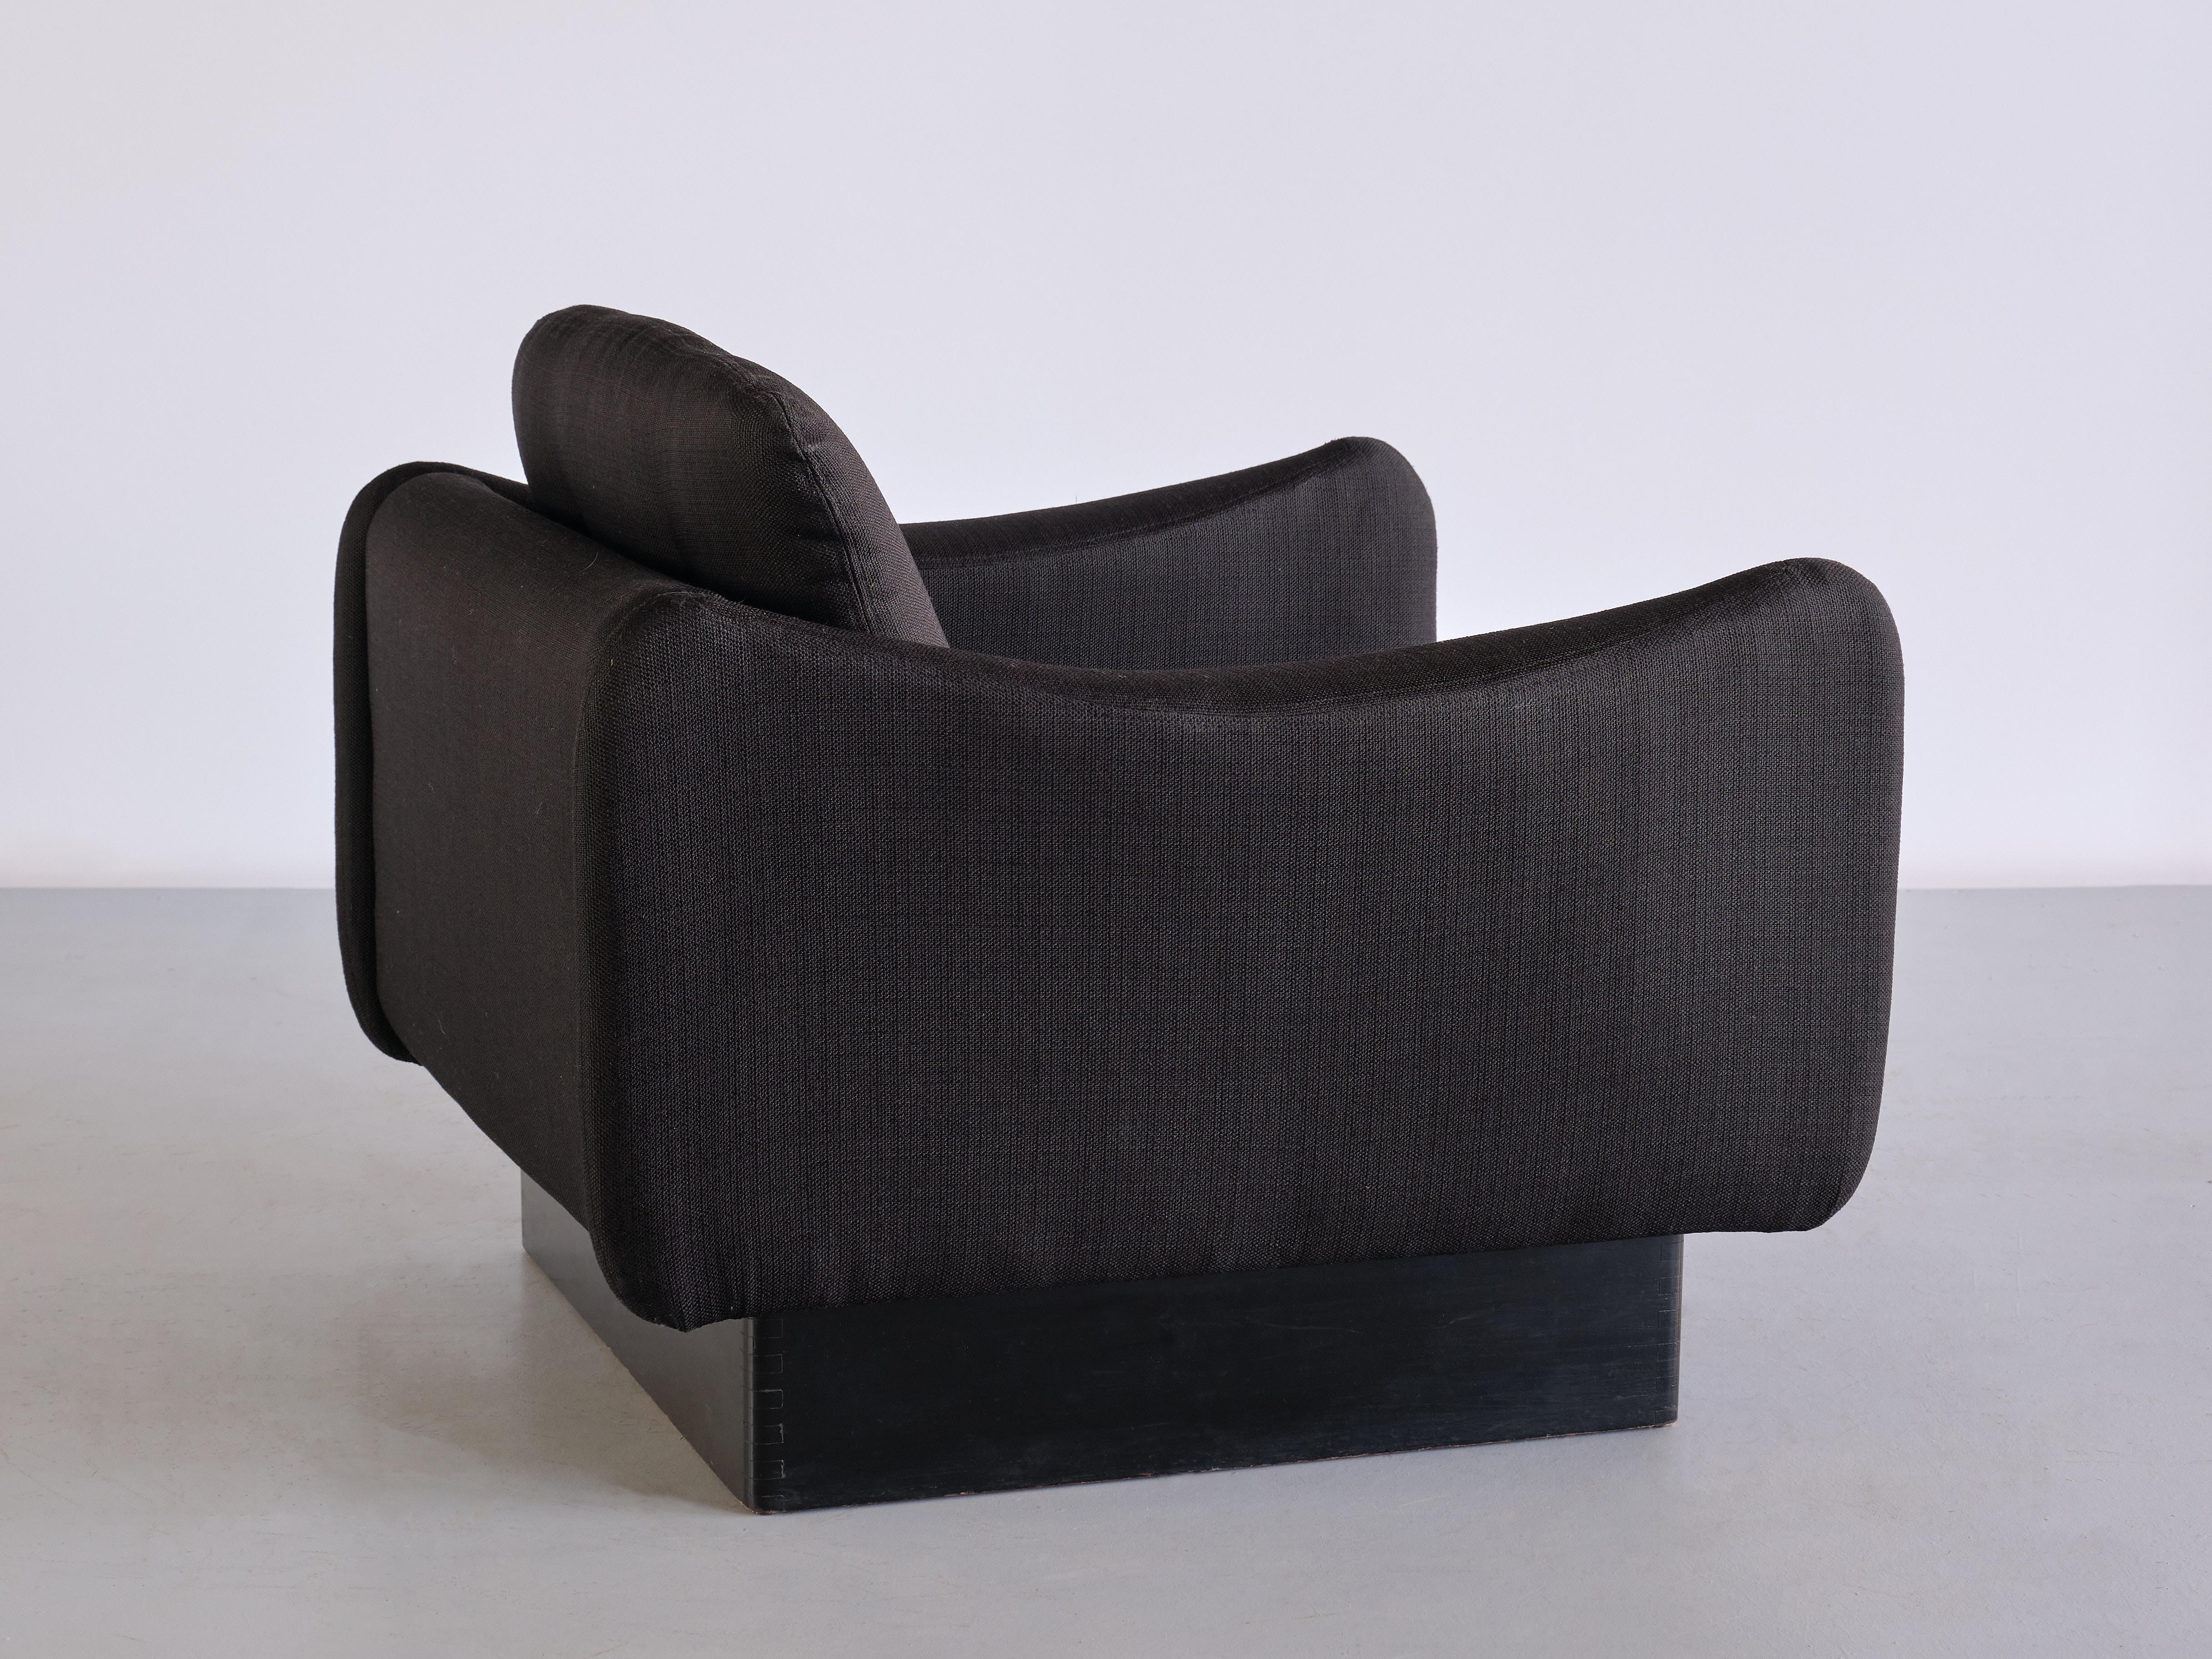 Mid-20th Century Michel Mortier 'Teckel' Lounge Chair in Black Wool & Wood, Steiner, France, 1963 For Sale